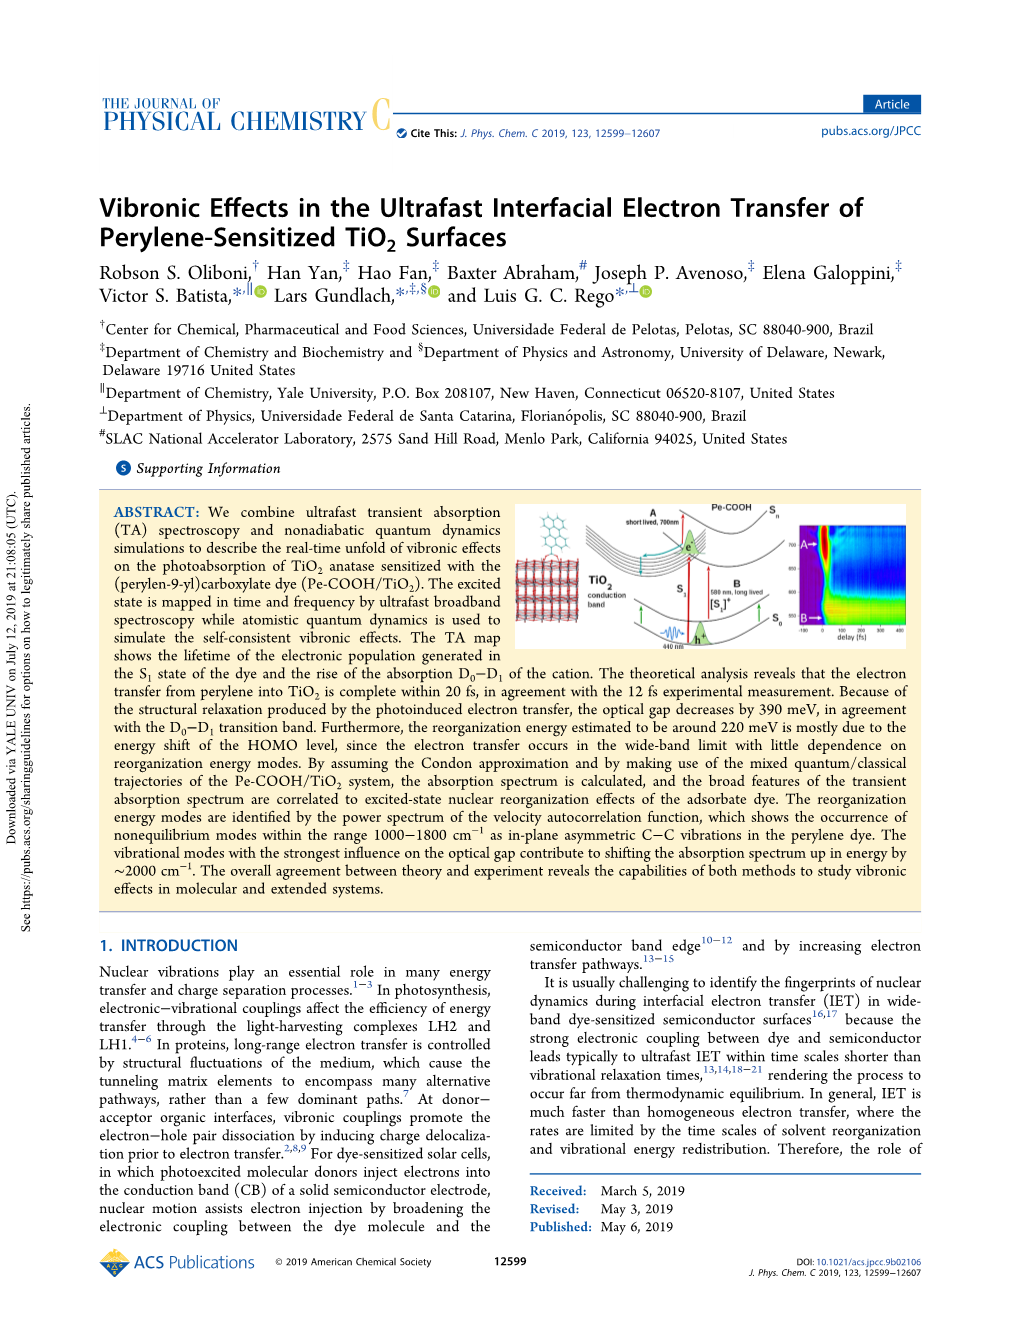 Vibronic Effects in the Ultrafast Interfacial Electron Transfer Of